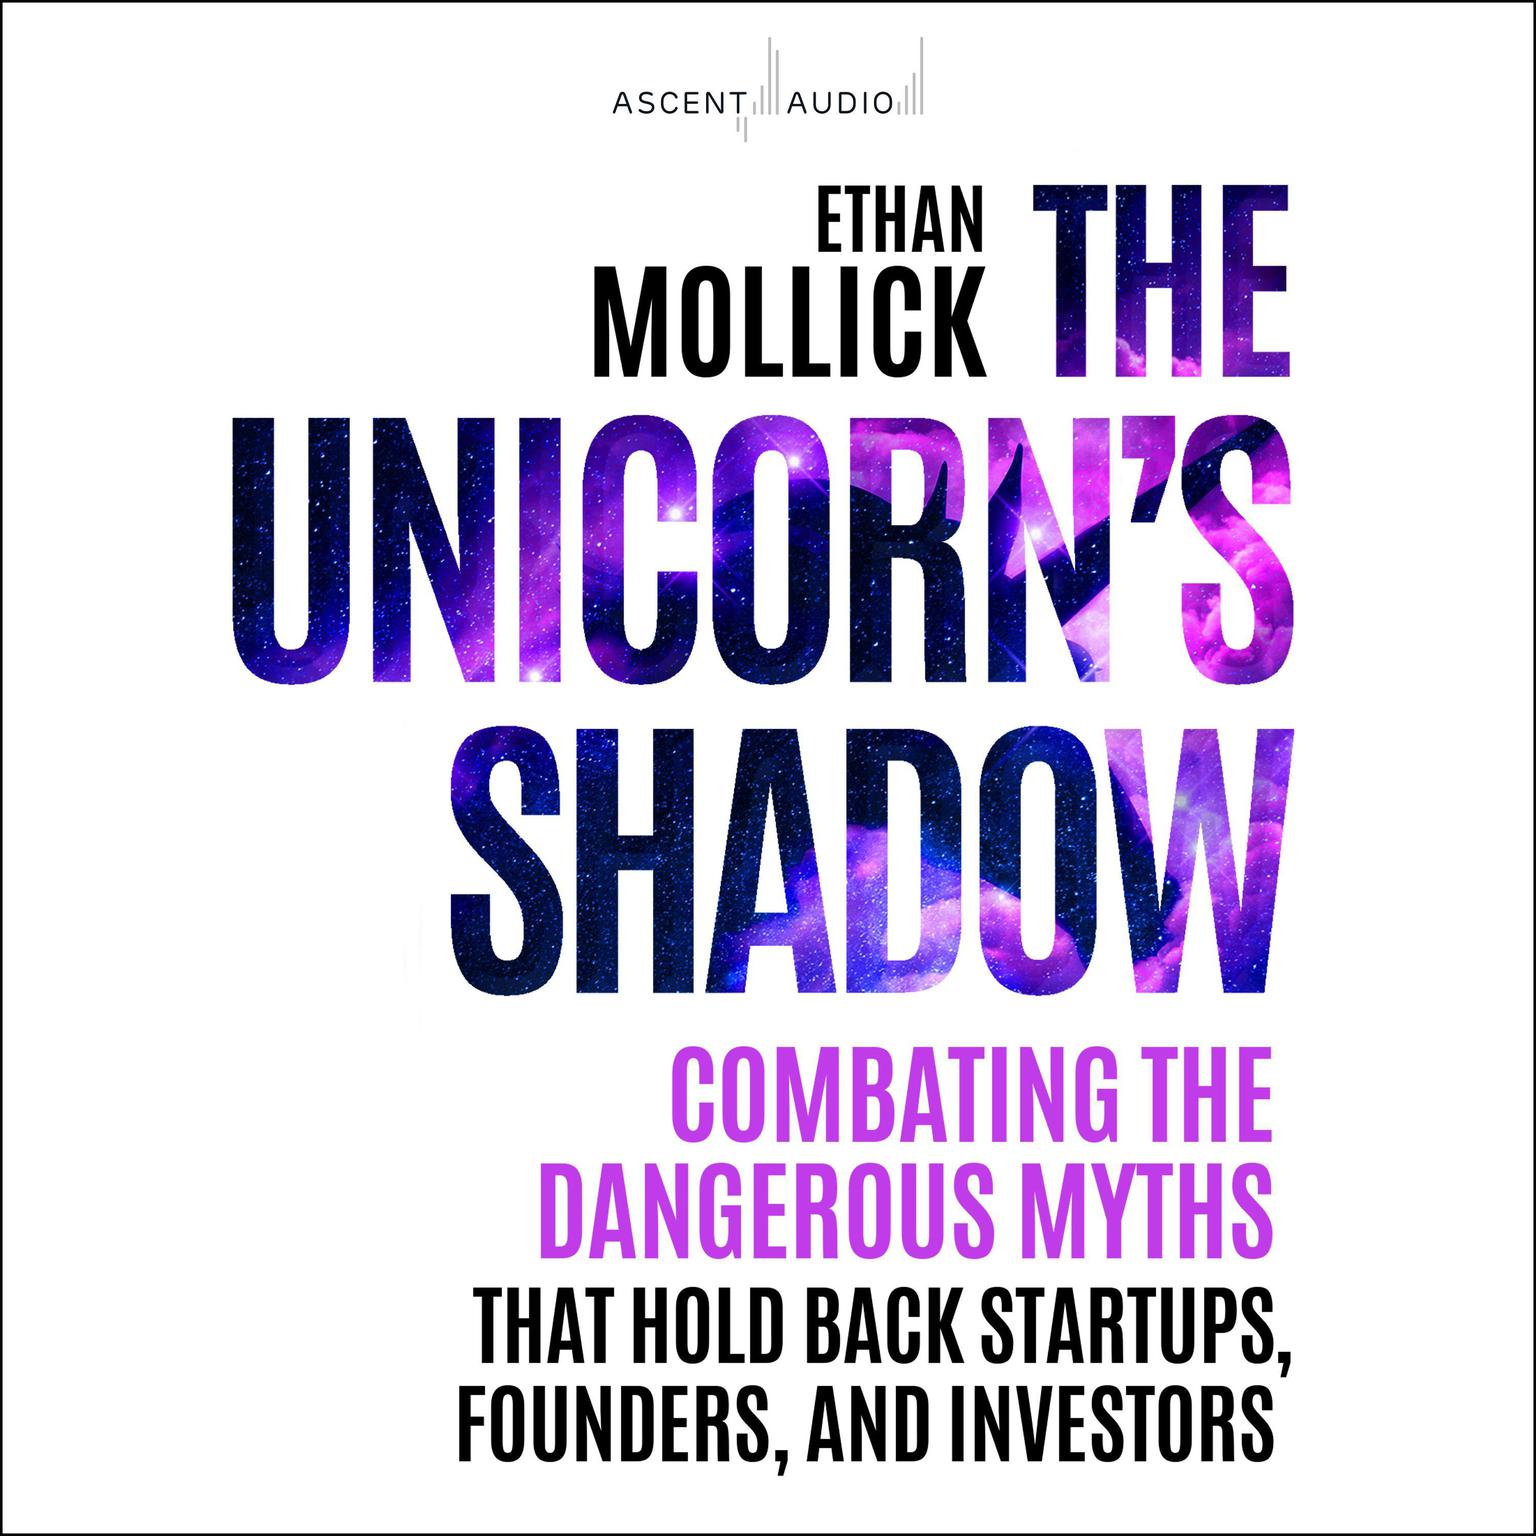 The Unicorn’s Shadow: Combating the Dangerous Myths that Hold Back Startups, Founders, and Investors Audiobook, by Ethan Mollick